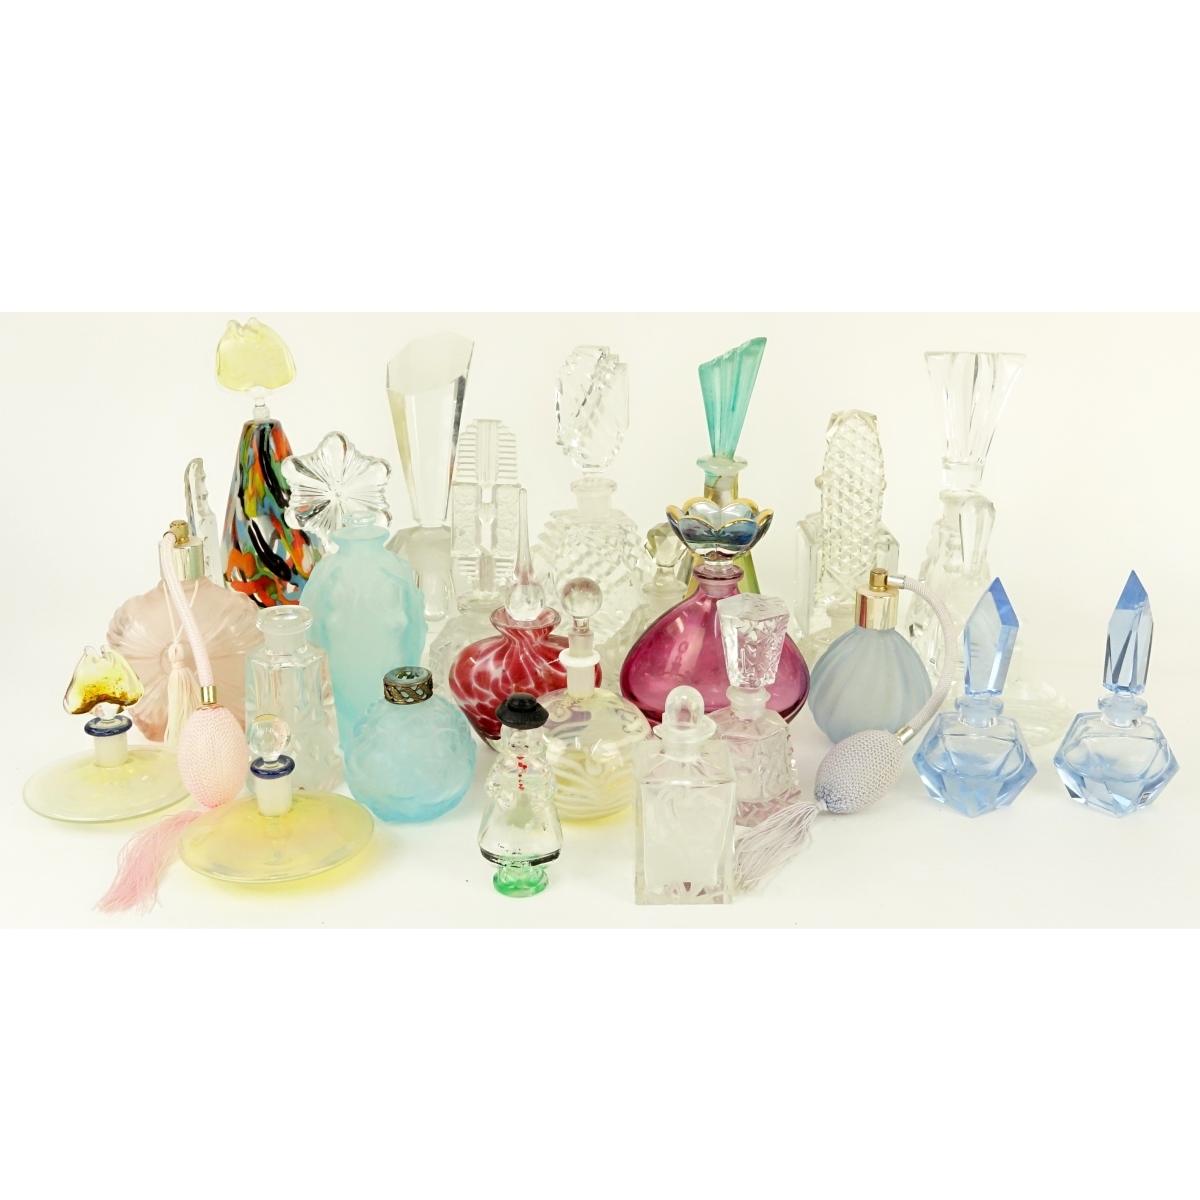 Large Collection of Vintage Perfume Bottles